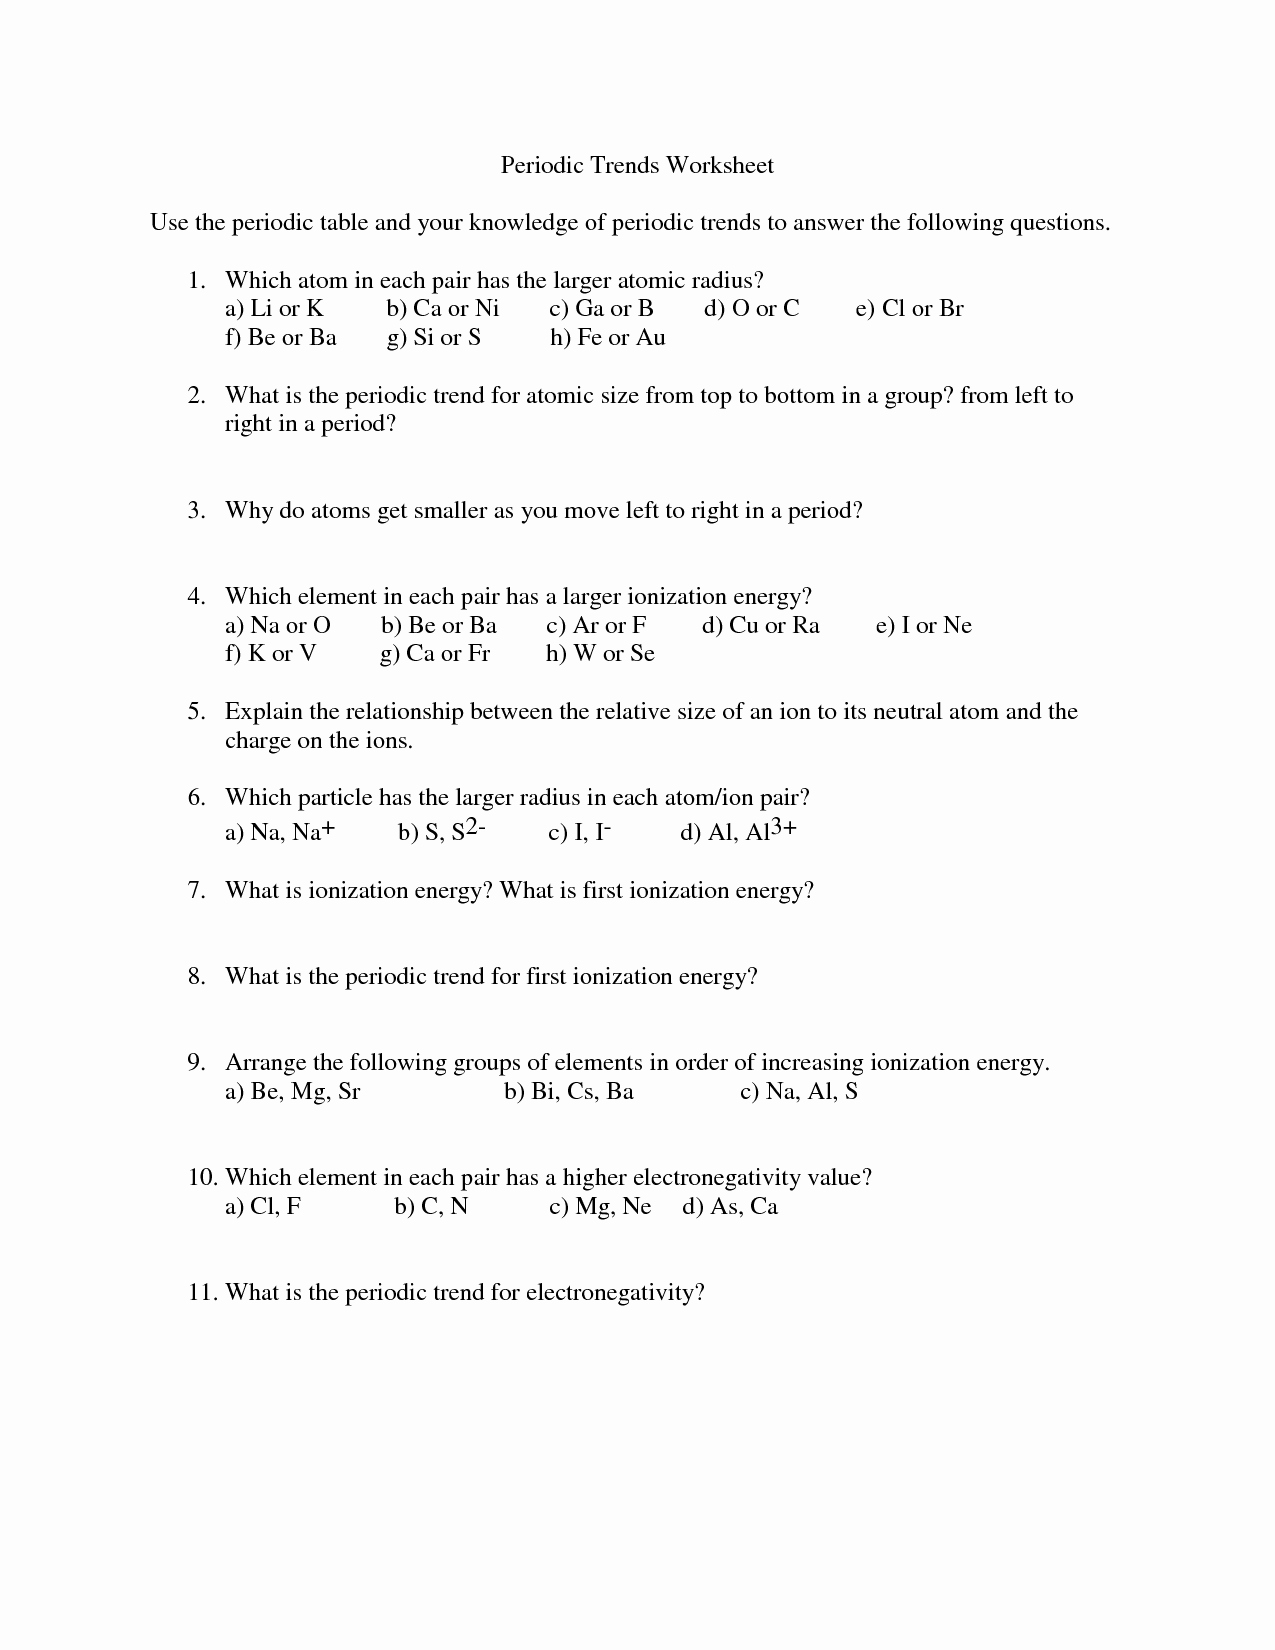 Periodic Trends Worksheet Answers Unique 20 Best Of Periodic Trends Worksheet Answers Key